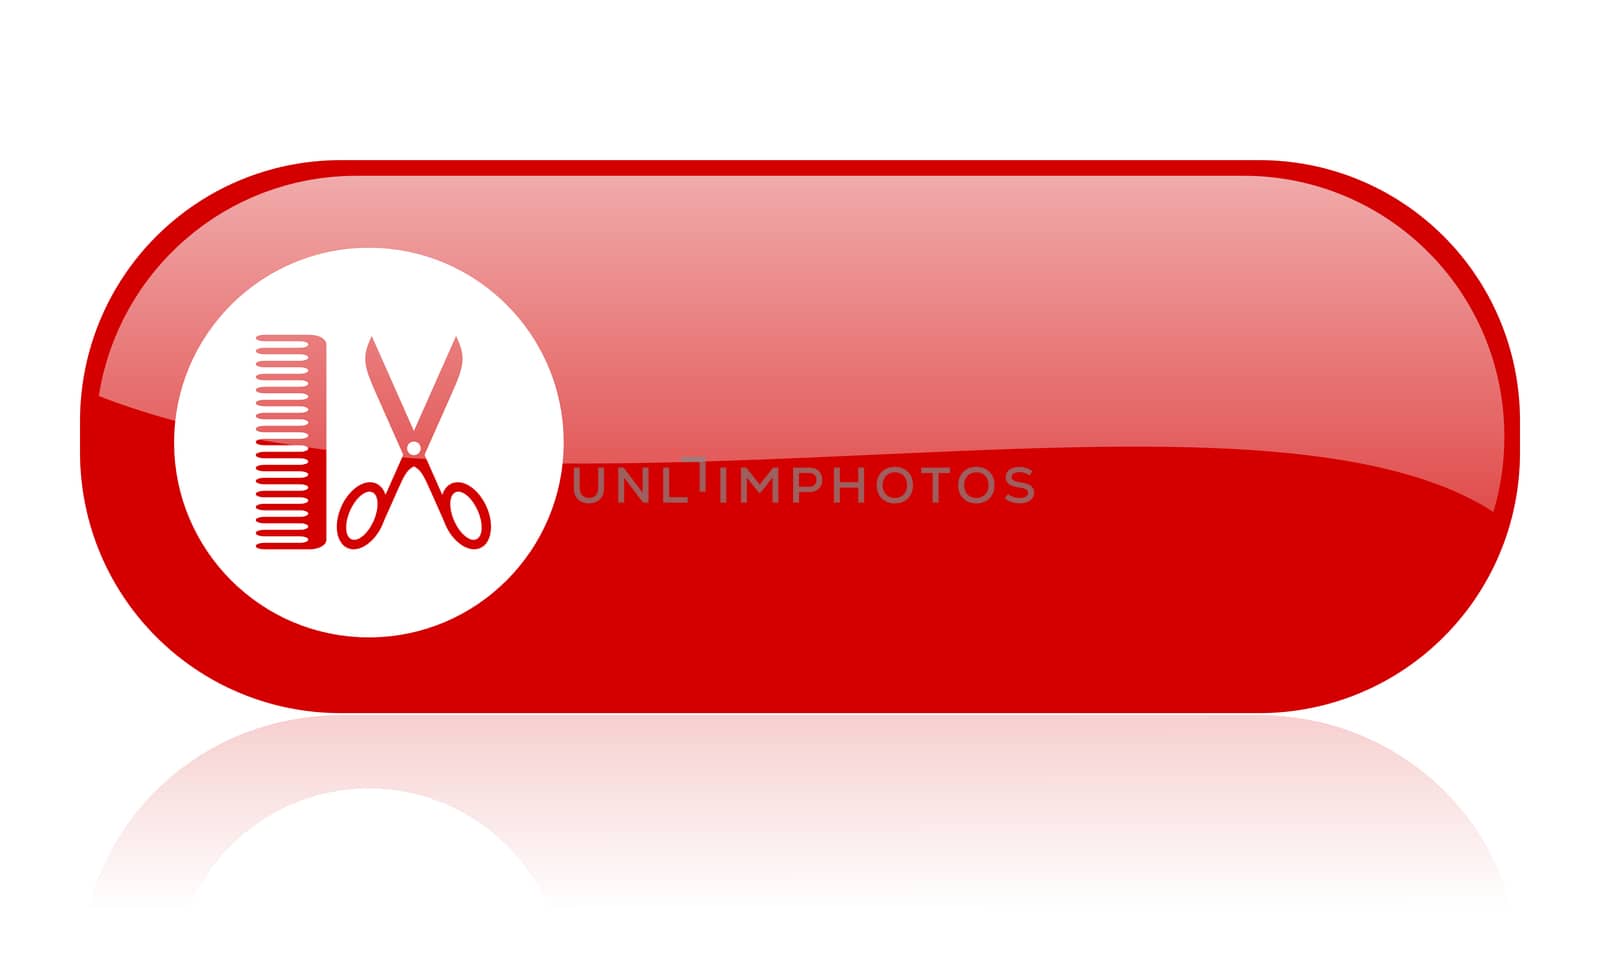 barber red web glossy icon